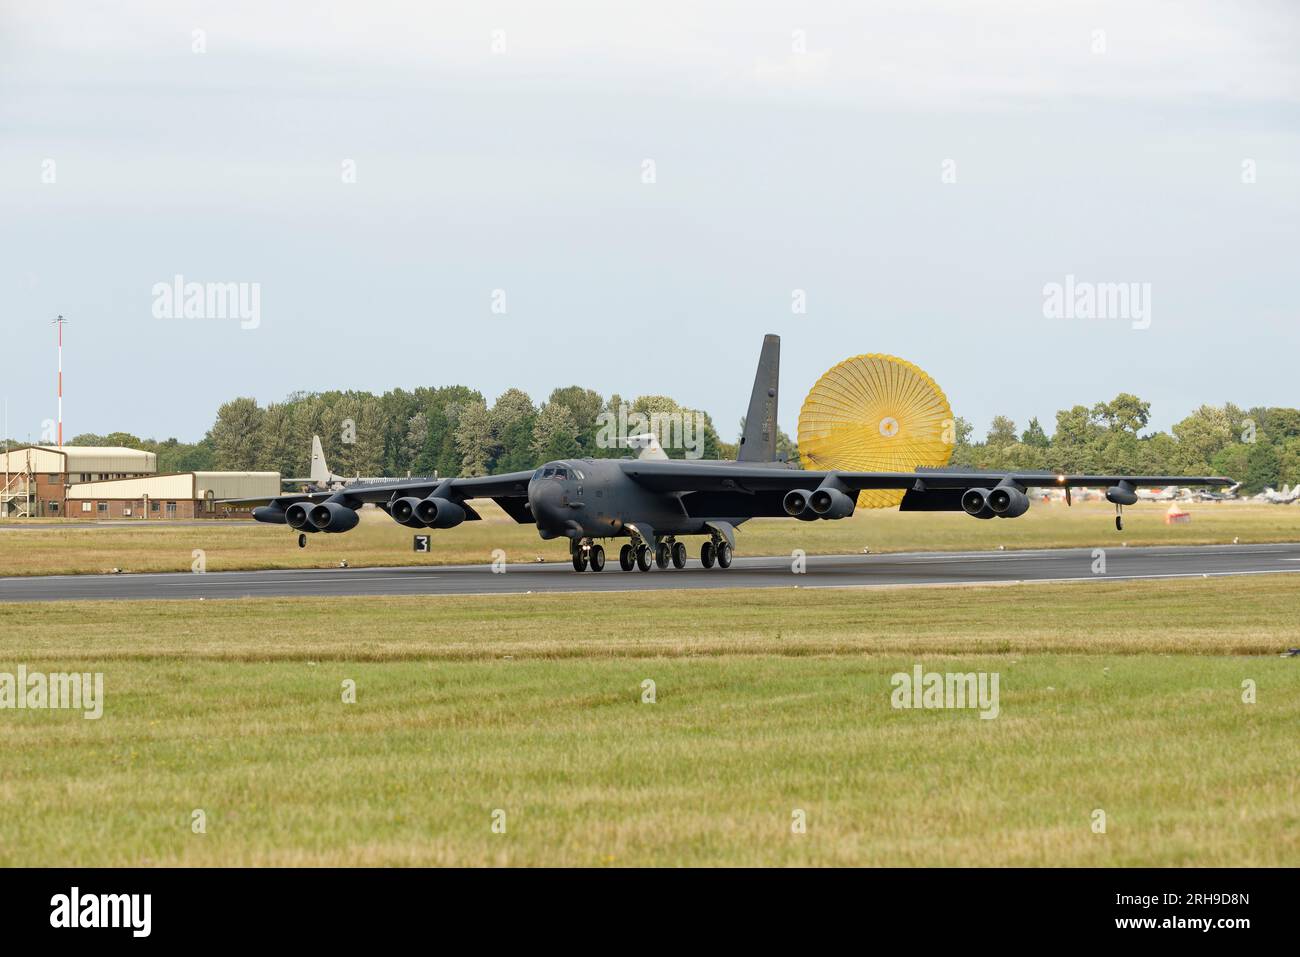 Boeing B-52 Stratofortress from the 93rd Bomb Squadron Barksdale Air Force Base Louisiana lands after displaying at the Royal International Air Tattoo Stock Photo